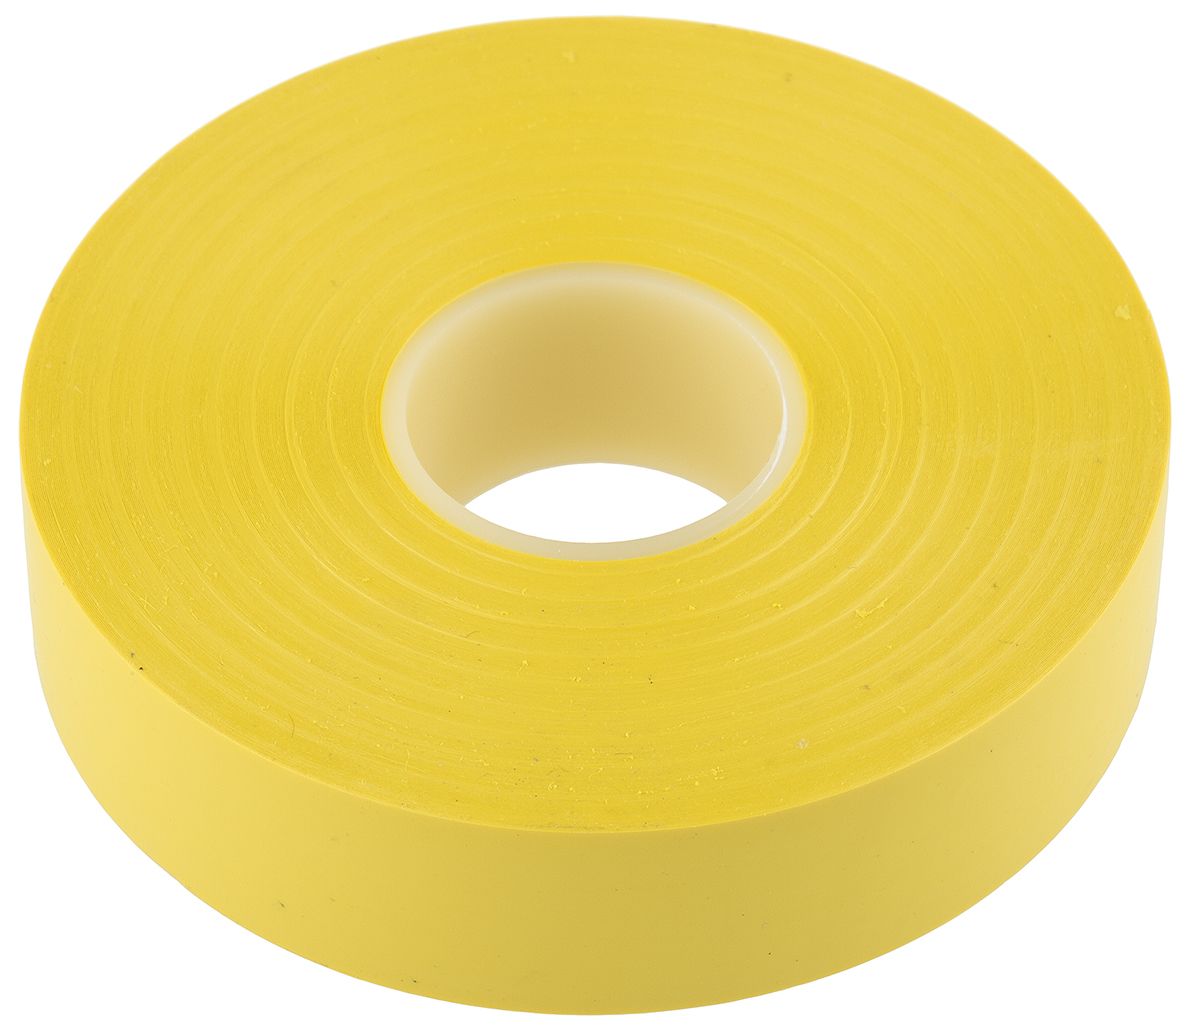 Advance Tapes AT7 Yellow PVC Electrical Tape, 19mm x 33m